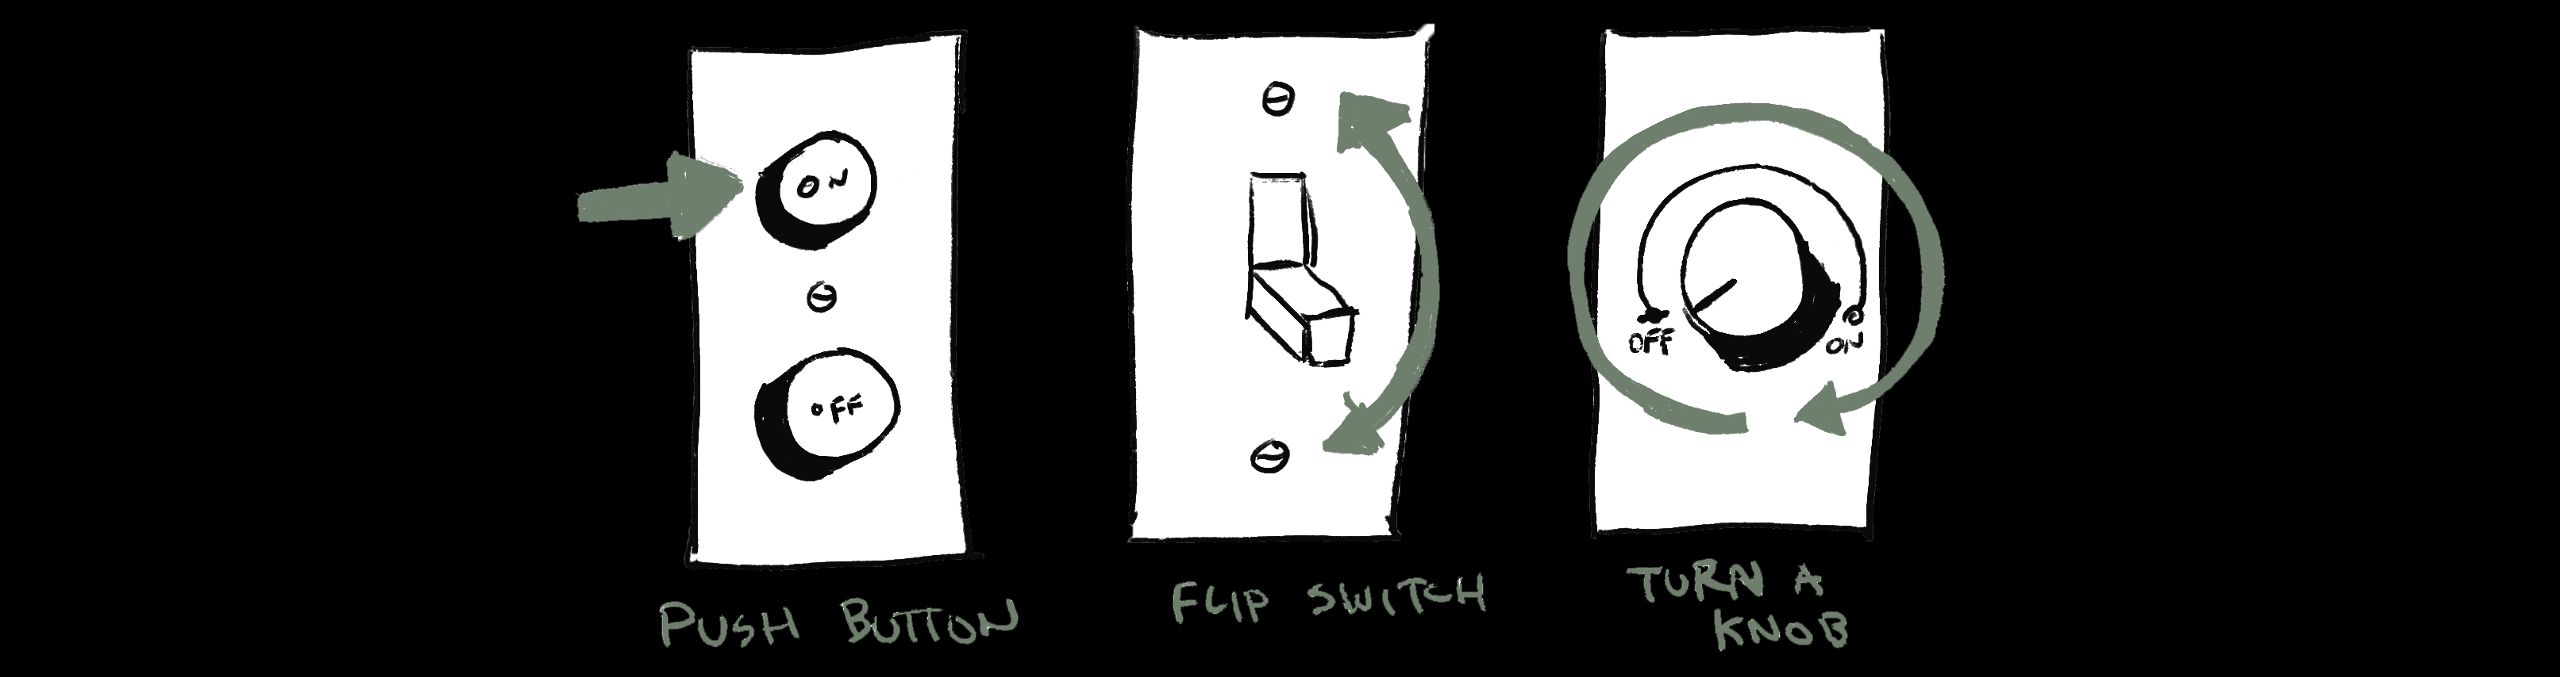 3 different light switches, on and off buttons, traditional light switch and a dimmer dial, to illustrate affordance